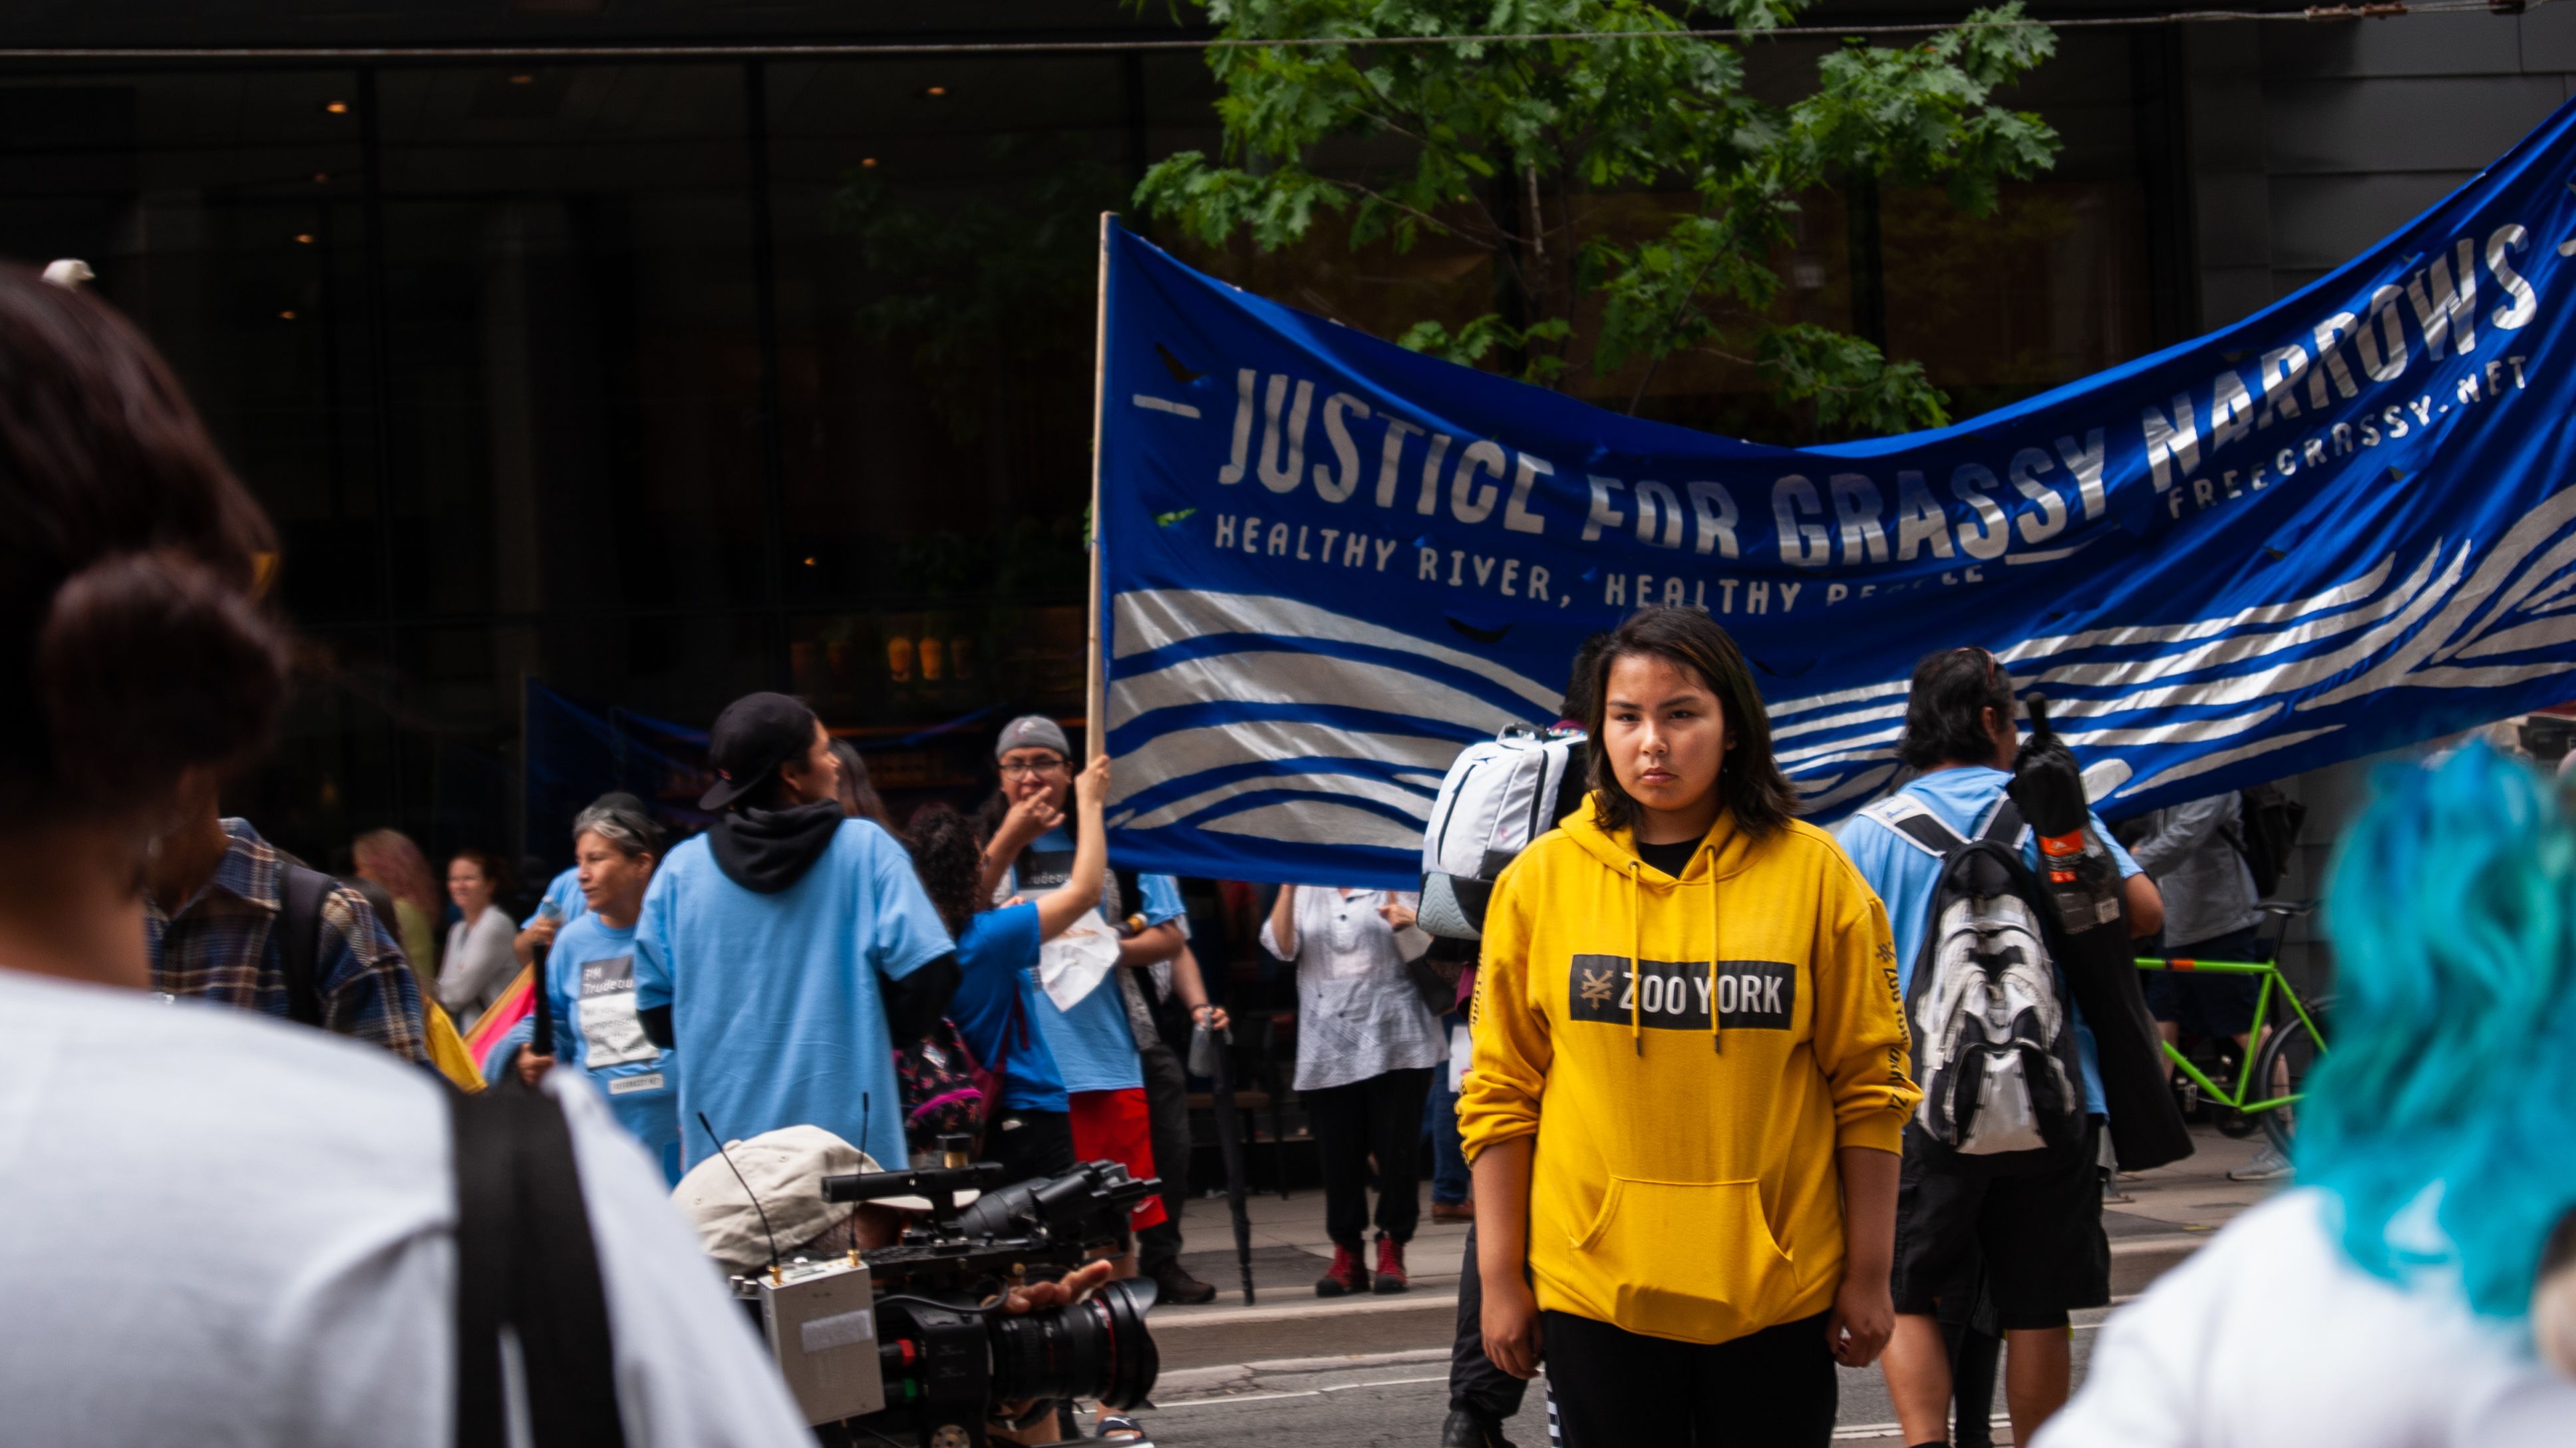 Jenae Turtle, a Grassy Narrows youth, at the June 20, 2019, River Run march. Canada, 2019. Image by Shelby Gilson.